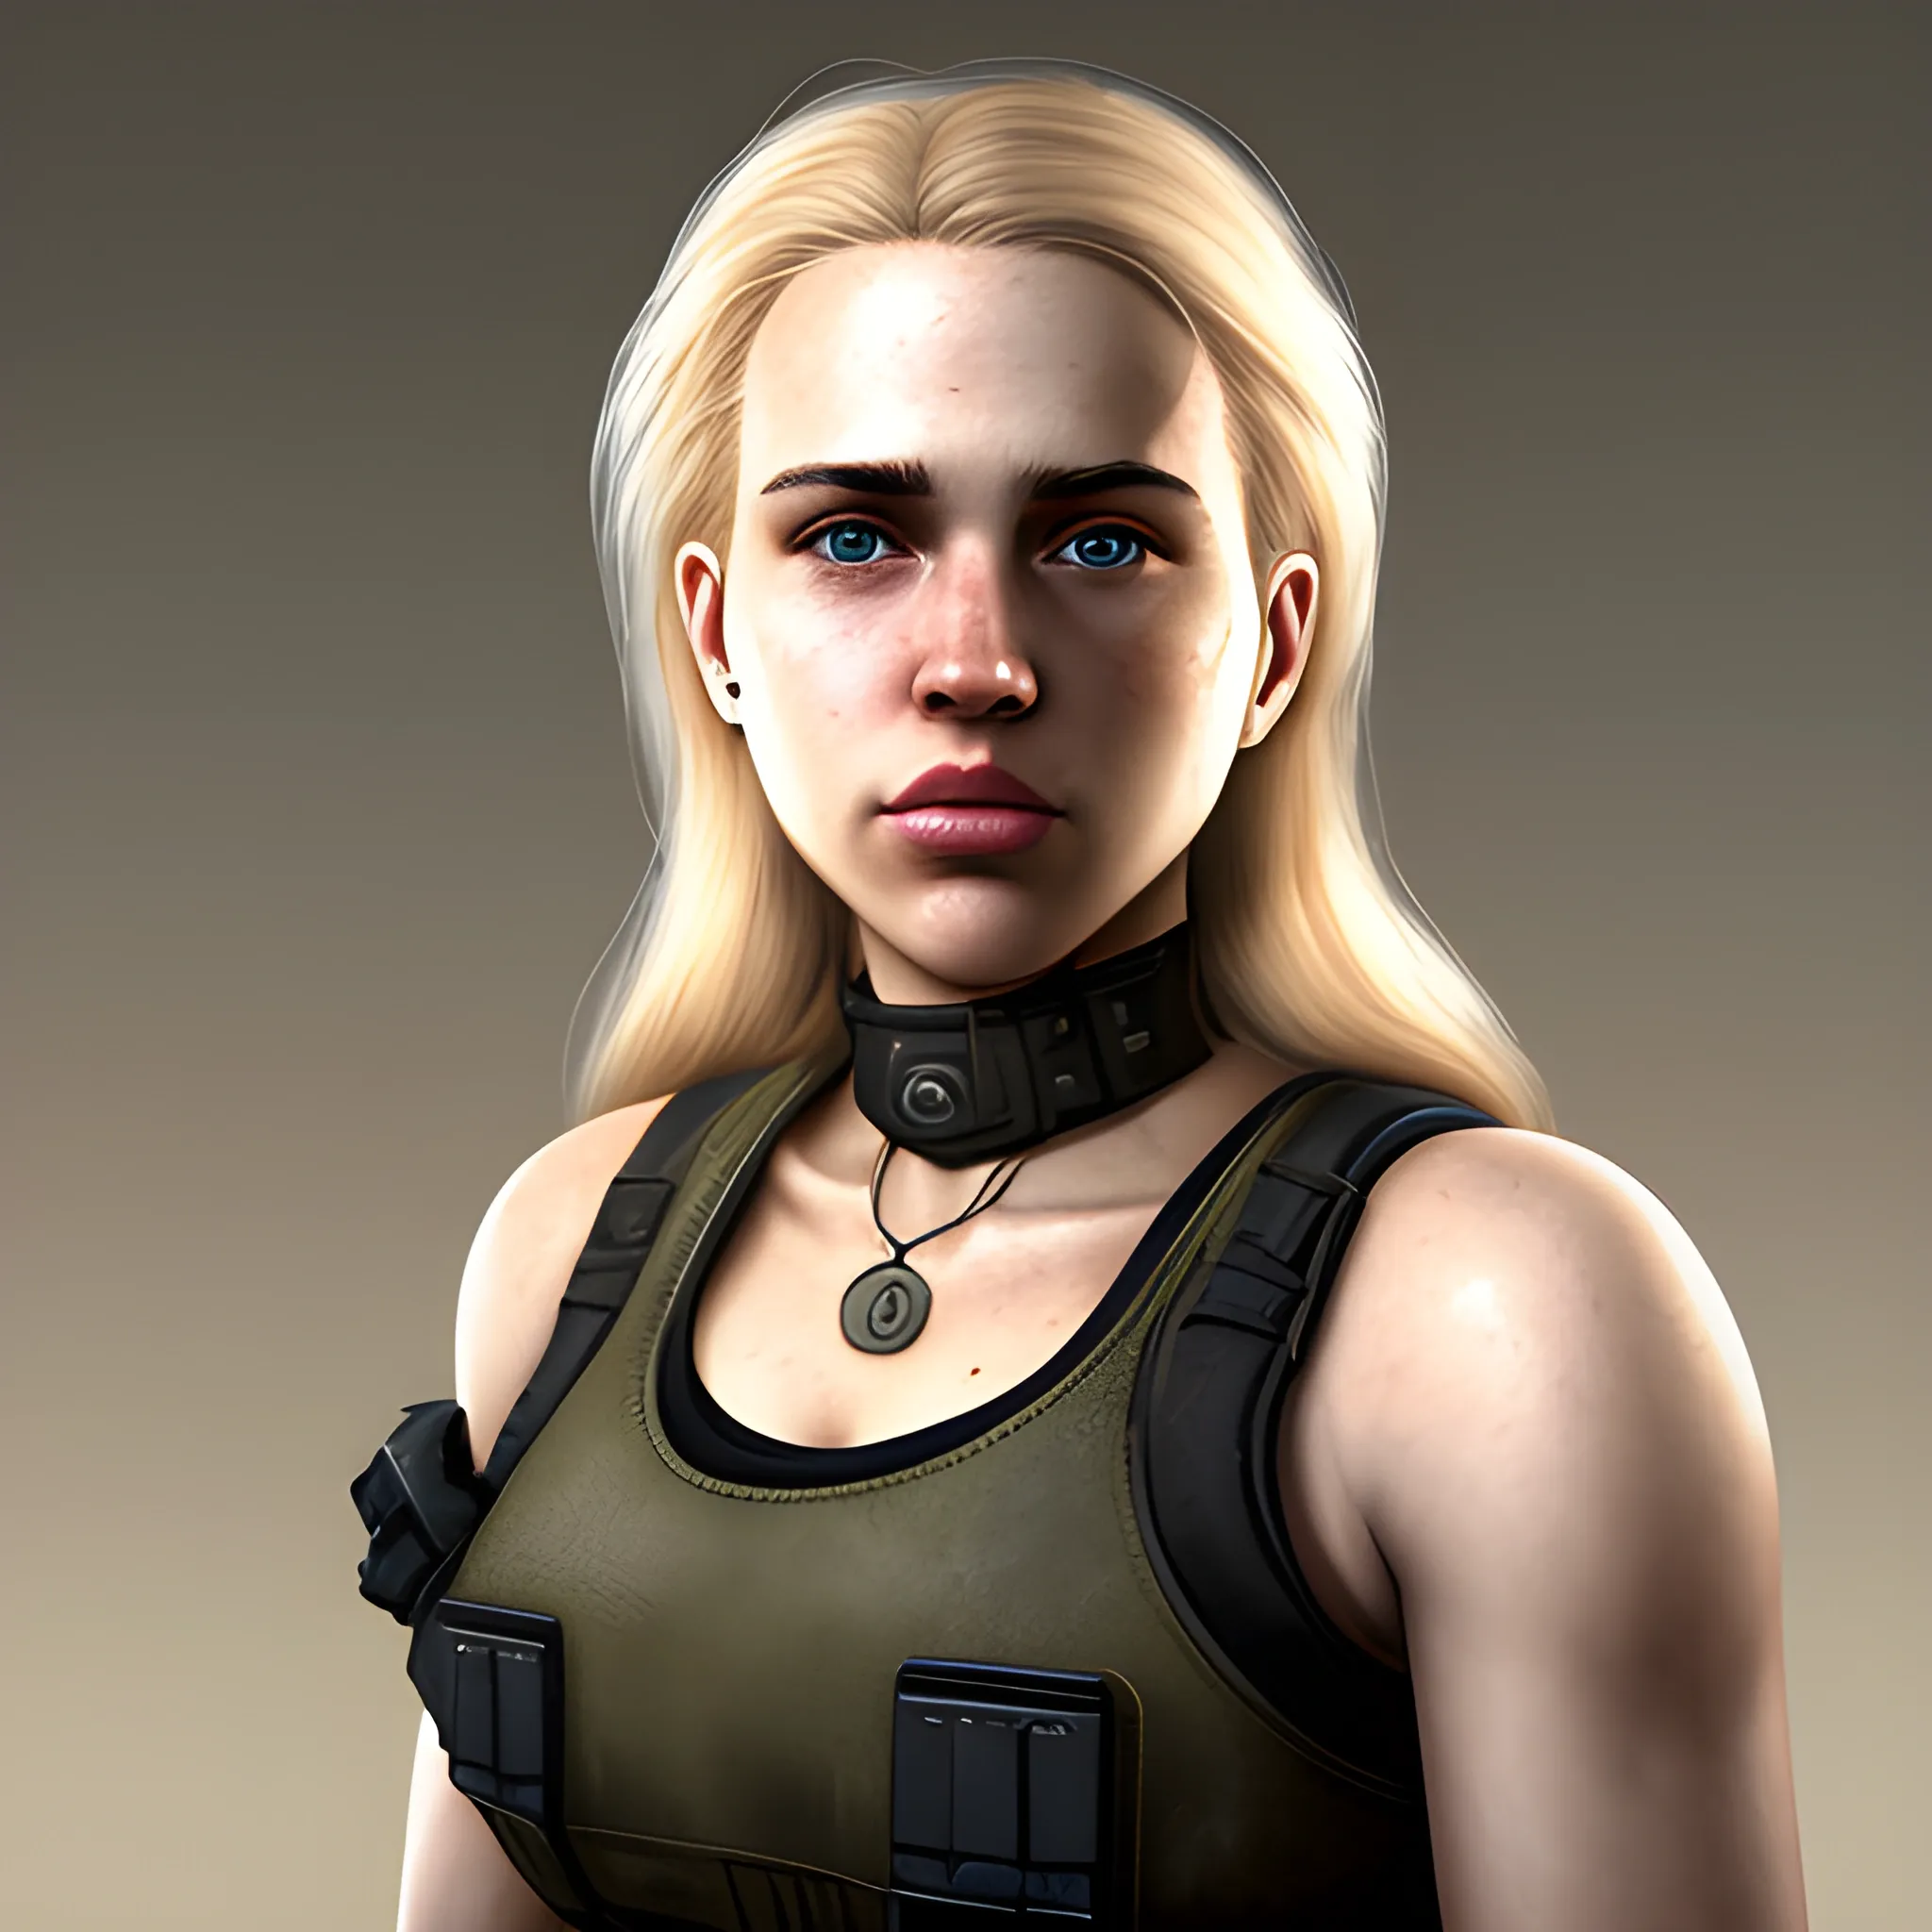 In the style of fallout 1, (masterpiece), (portrait photography), (portrait of a Caucasian female), no makeup, flat chested, white sports bra, dogtags, long hair, blond hair, brown eyes, full lips, round face, round nose, plump cheeks, black Bulletproof vest